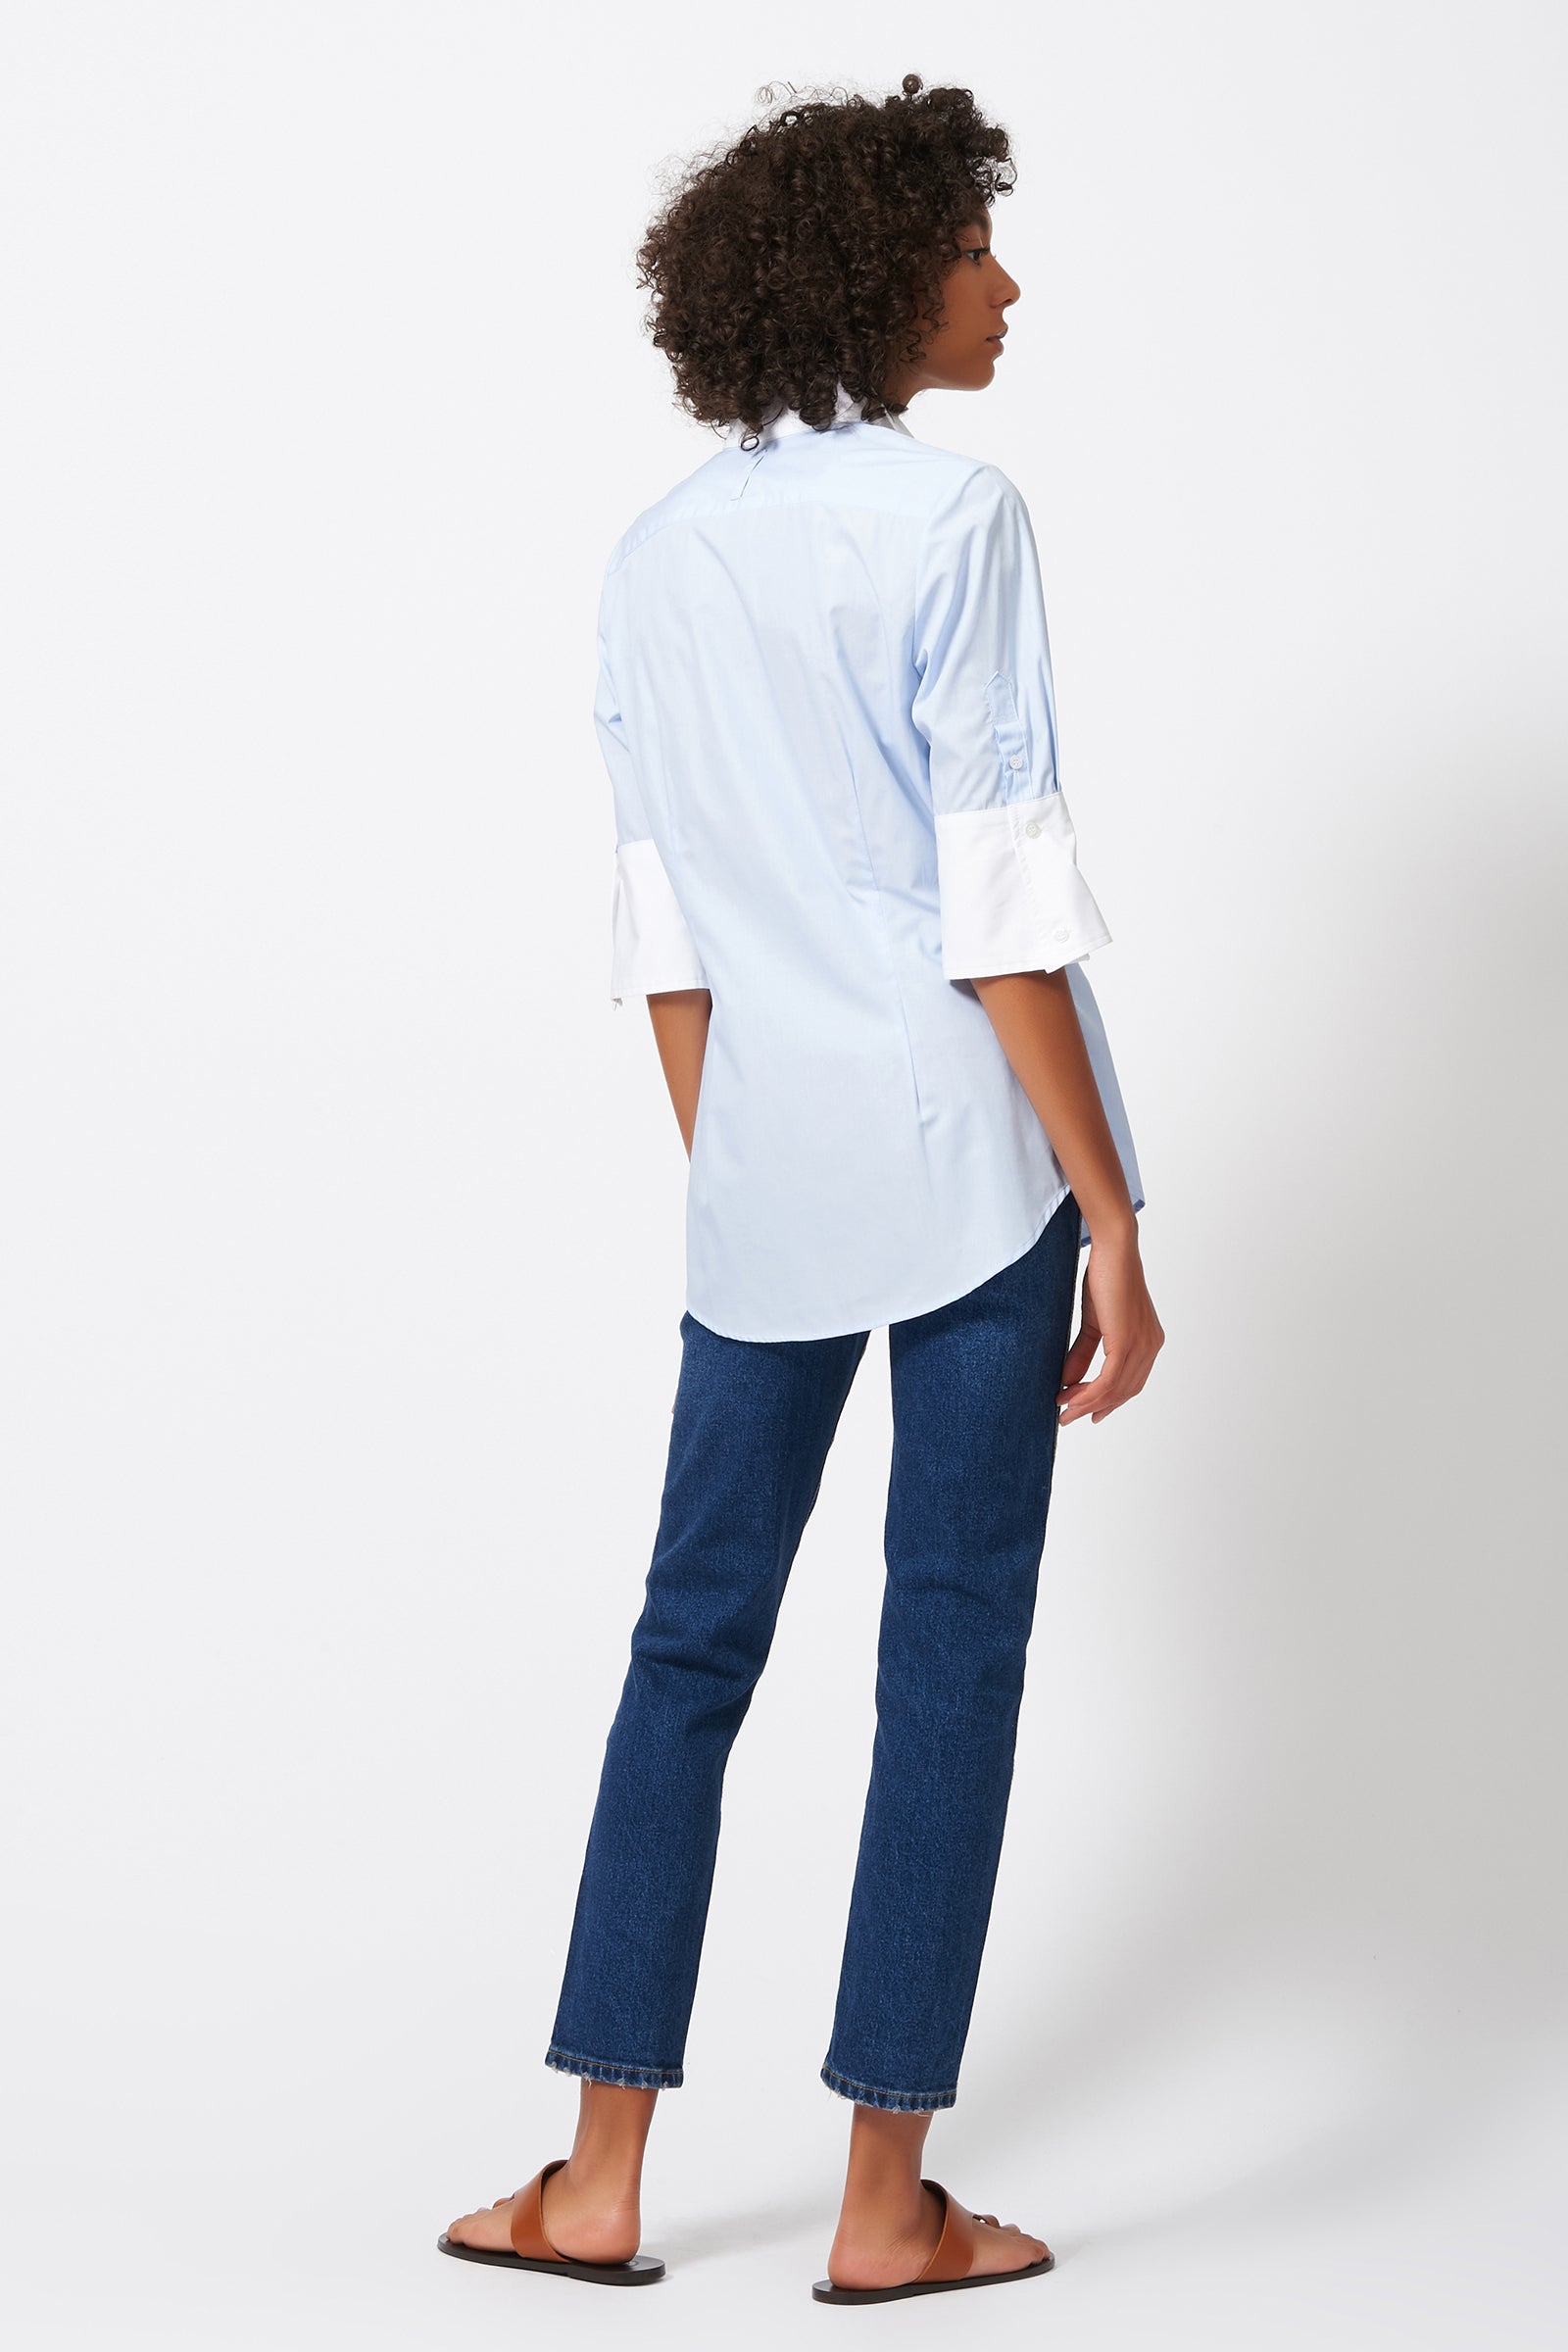 Kal Rieman Double Collar Shirt in Oxford and White Cotton Poplin on Model Back View